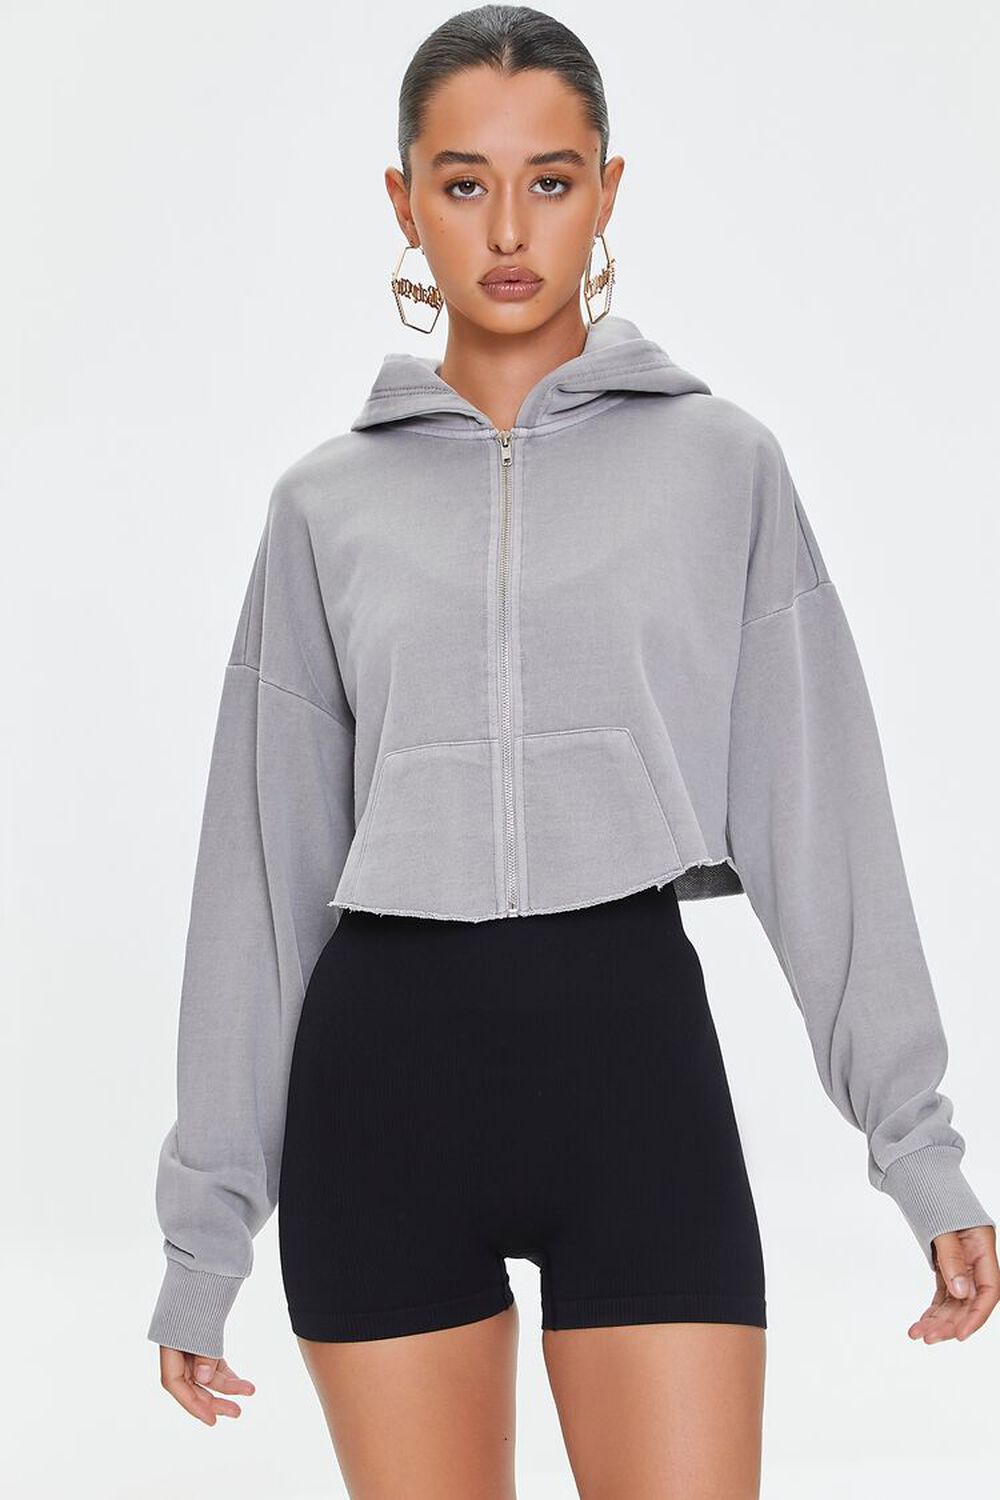 GREY French Terry Zip-Up Hoodie, image 1